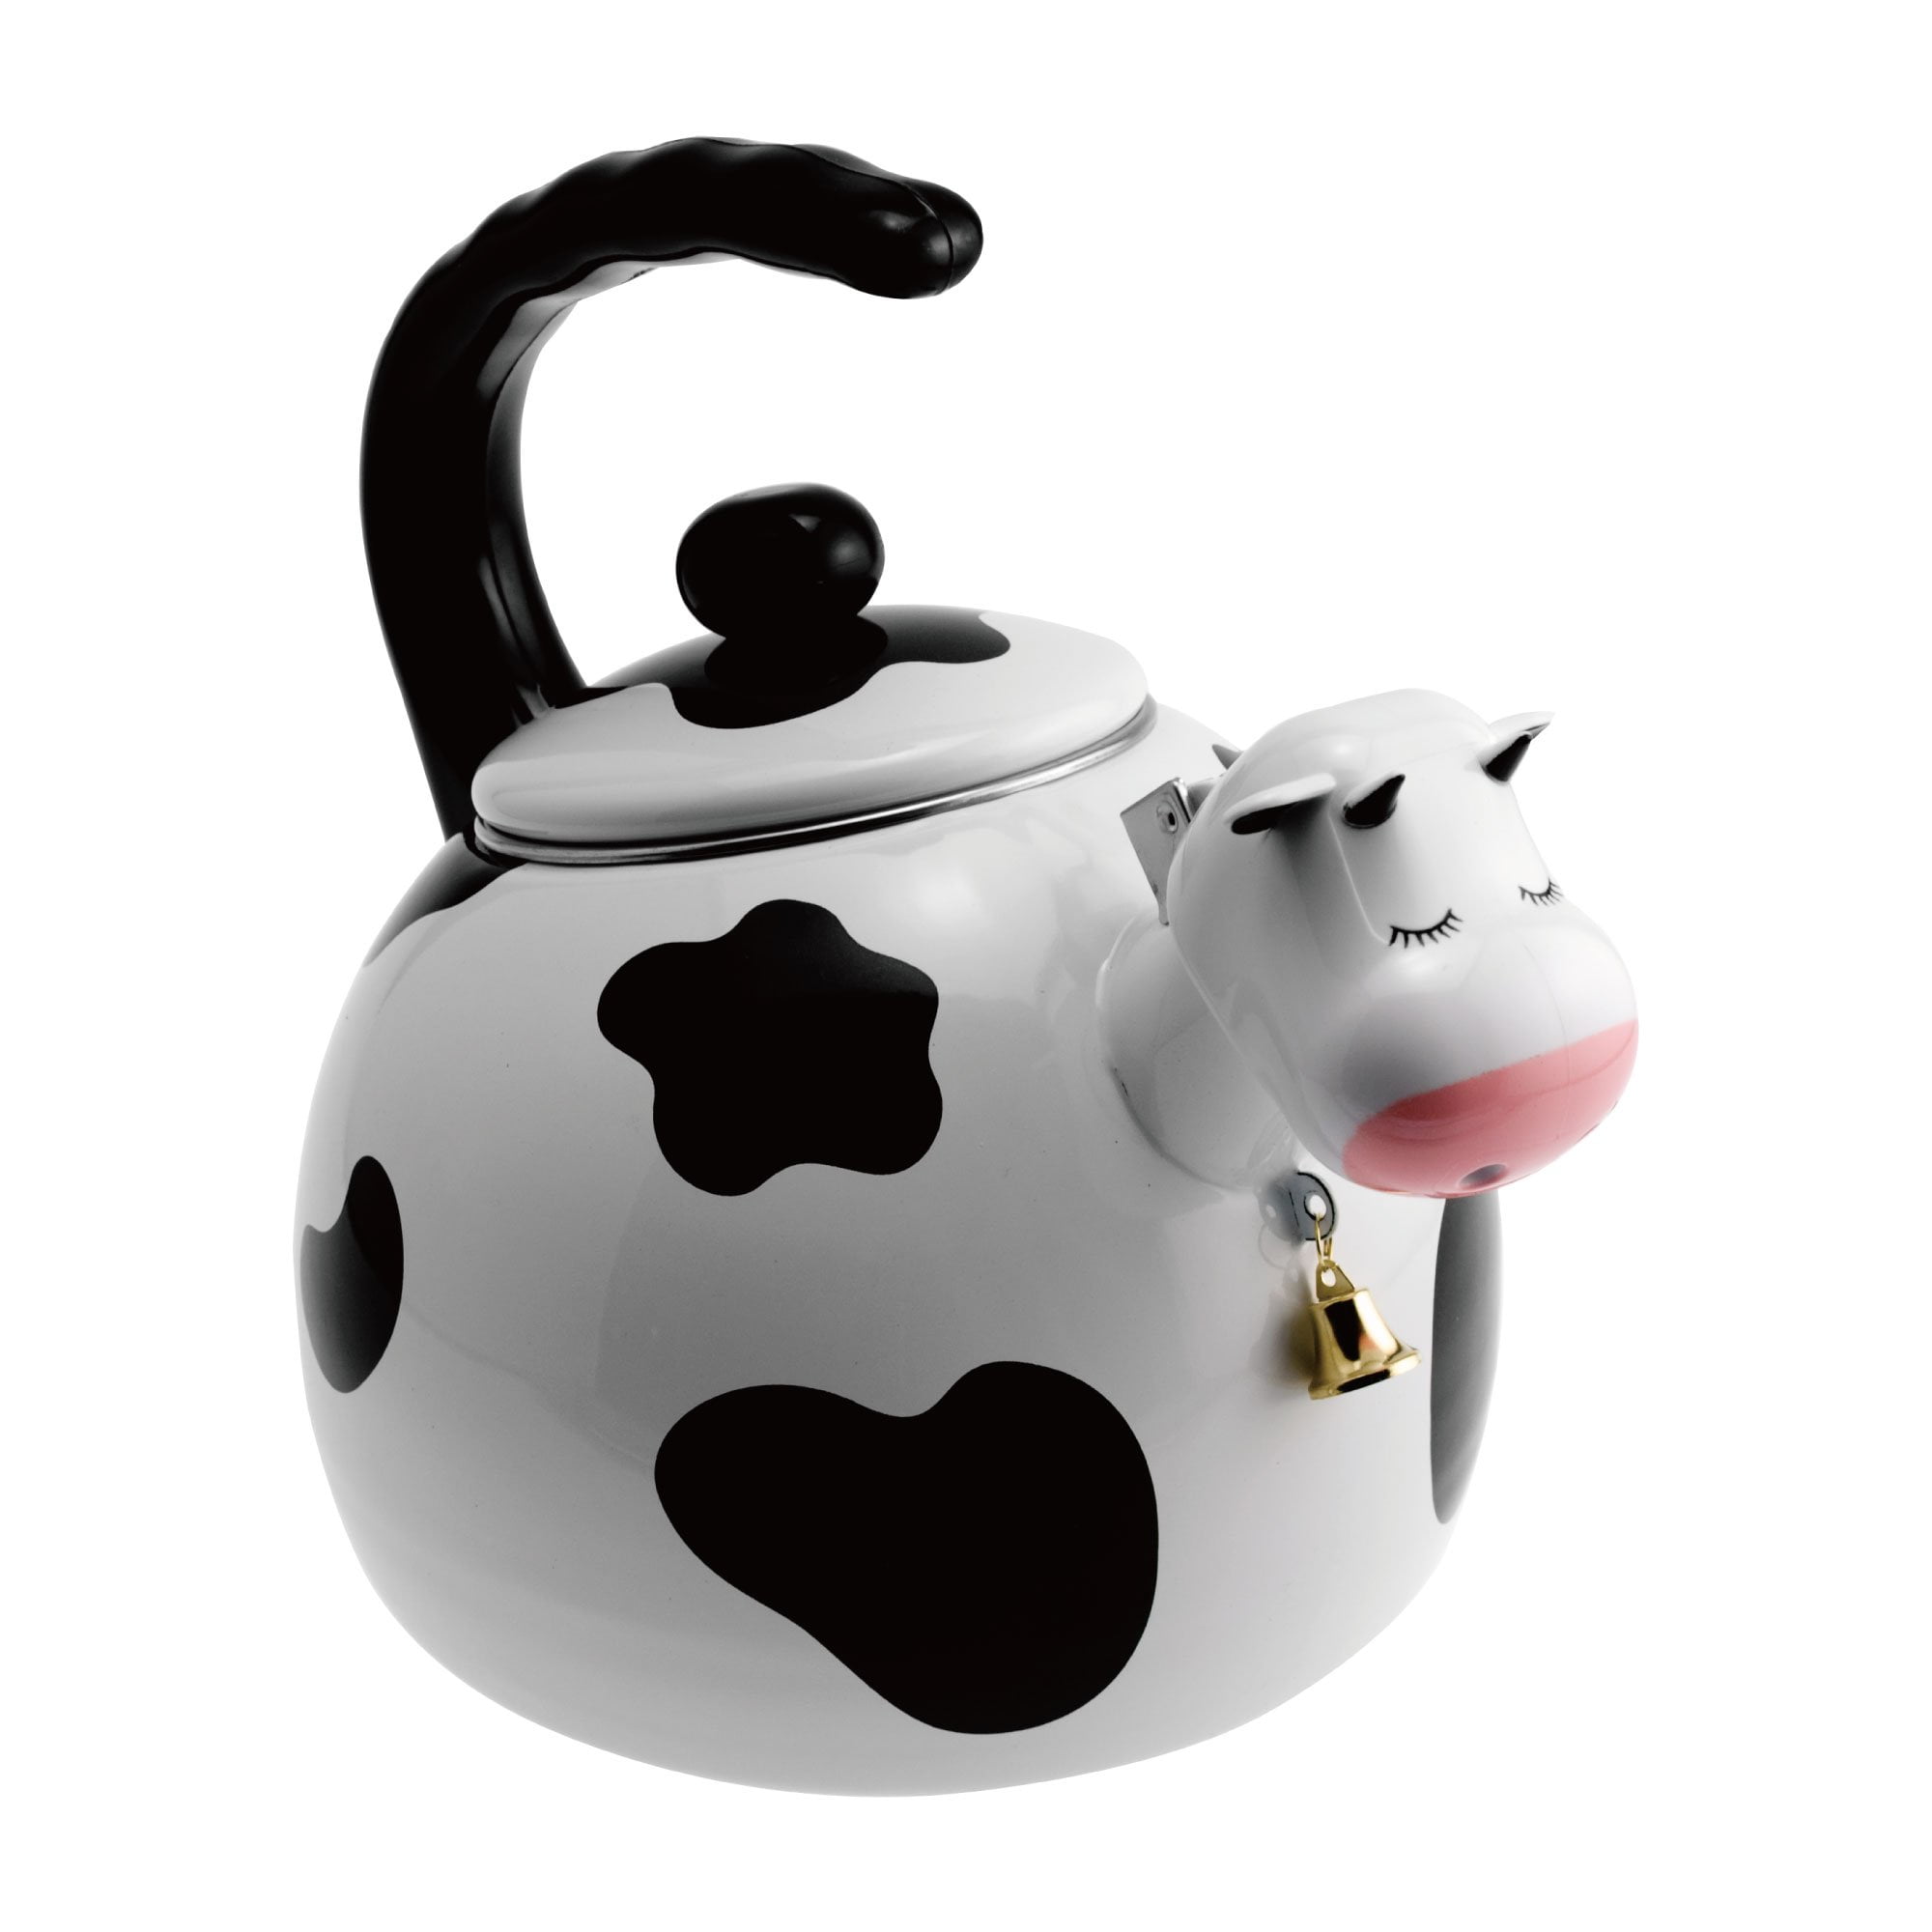 MOO COW TEA KETTLE For $2 In Houston, TX